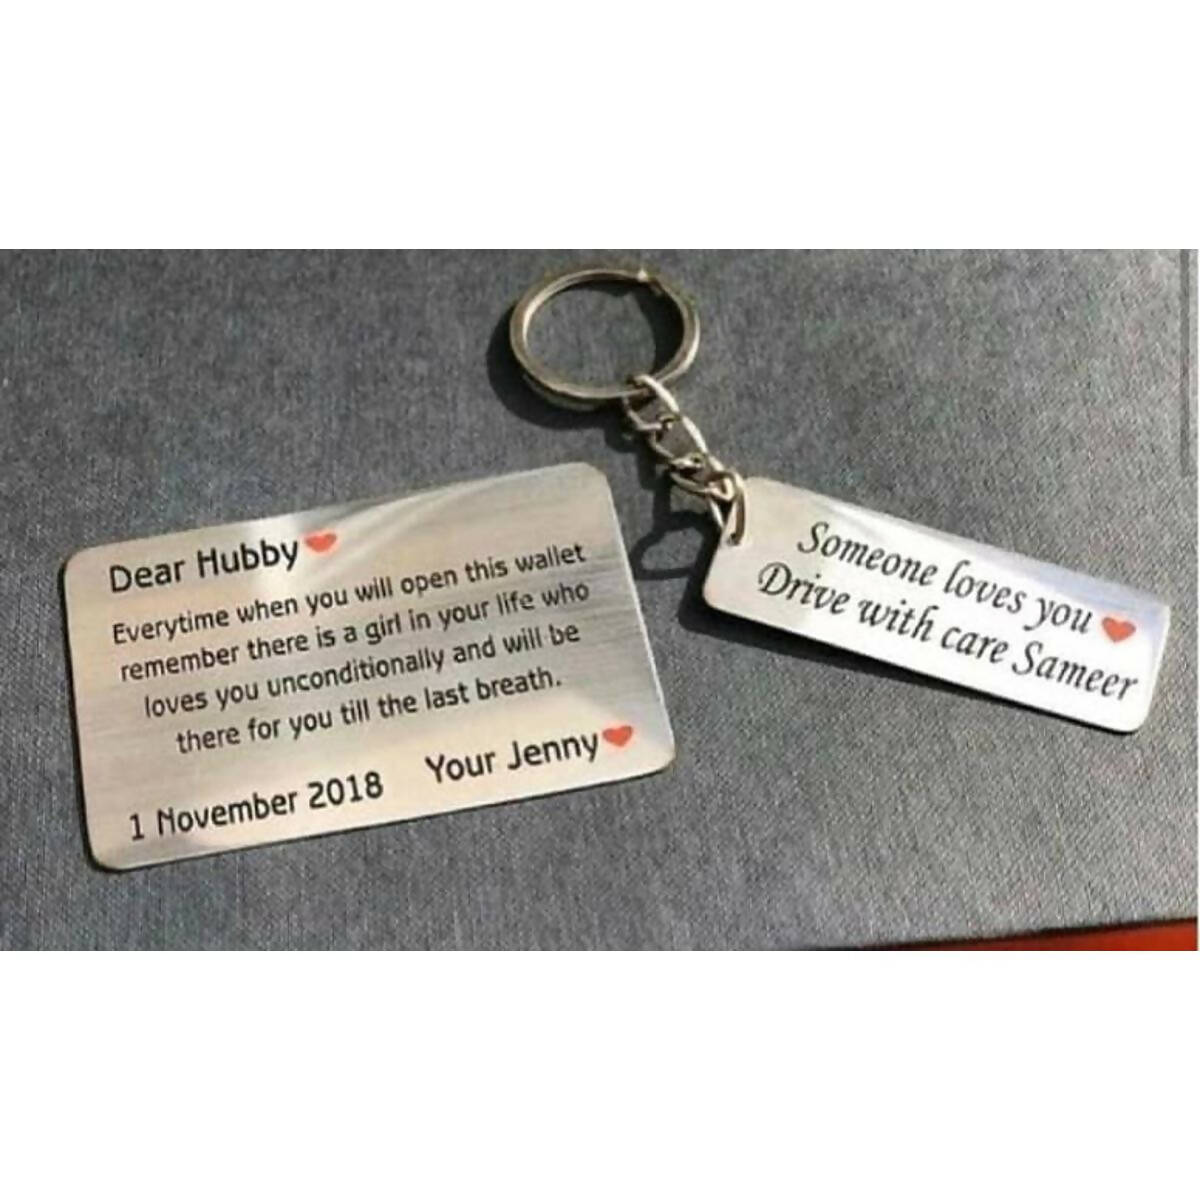 CUSTOMIZE METAL WALLET CARD WITH MESSAGE